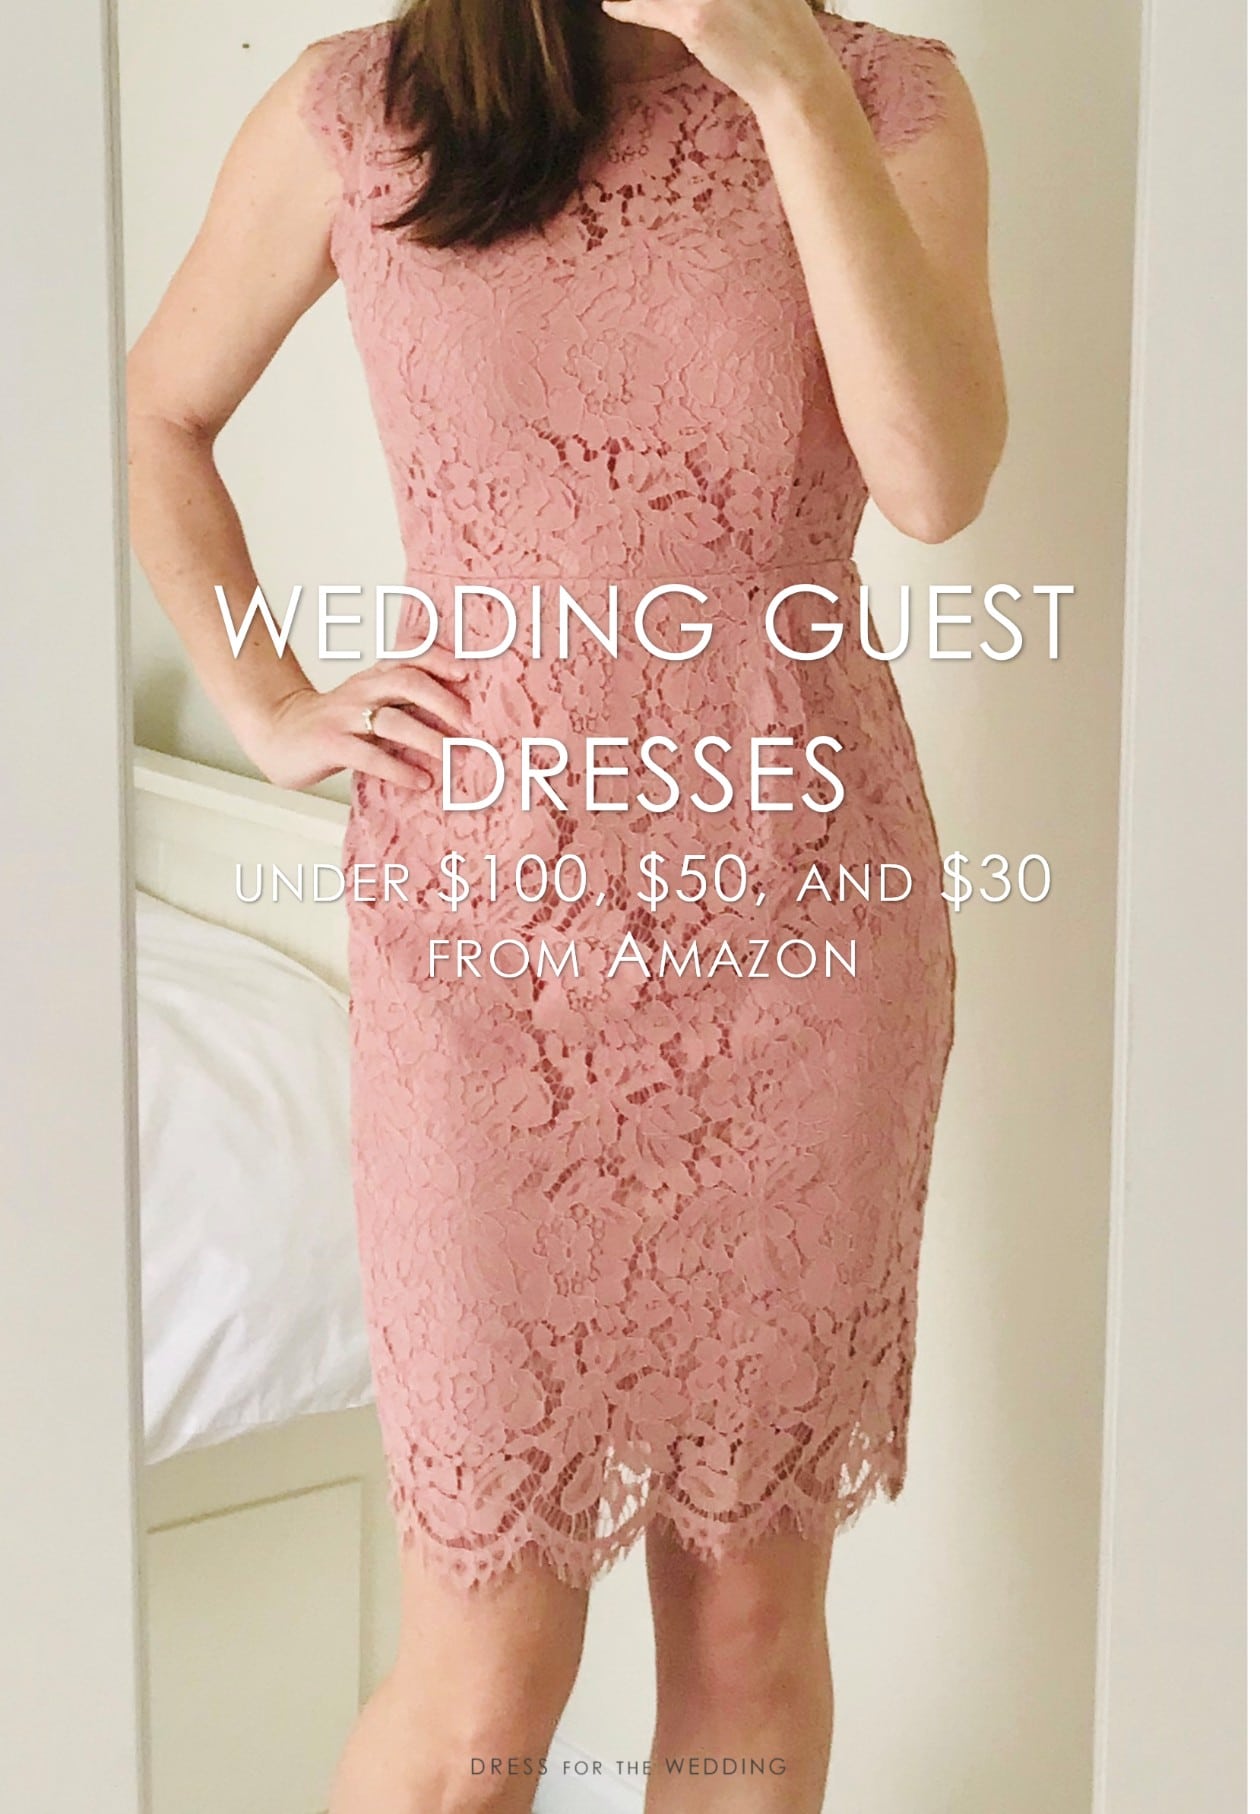 Best Wedding Guest Dresses From Amazon (For Under 100